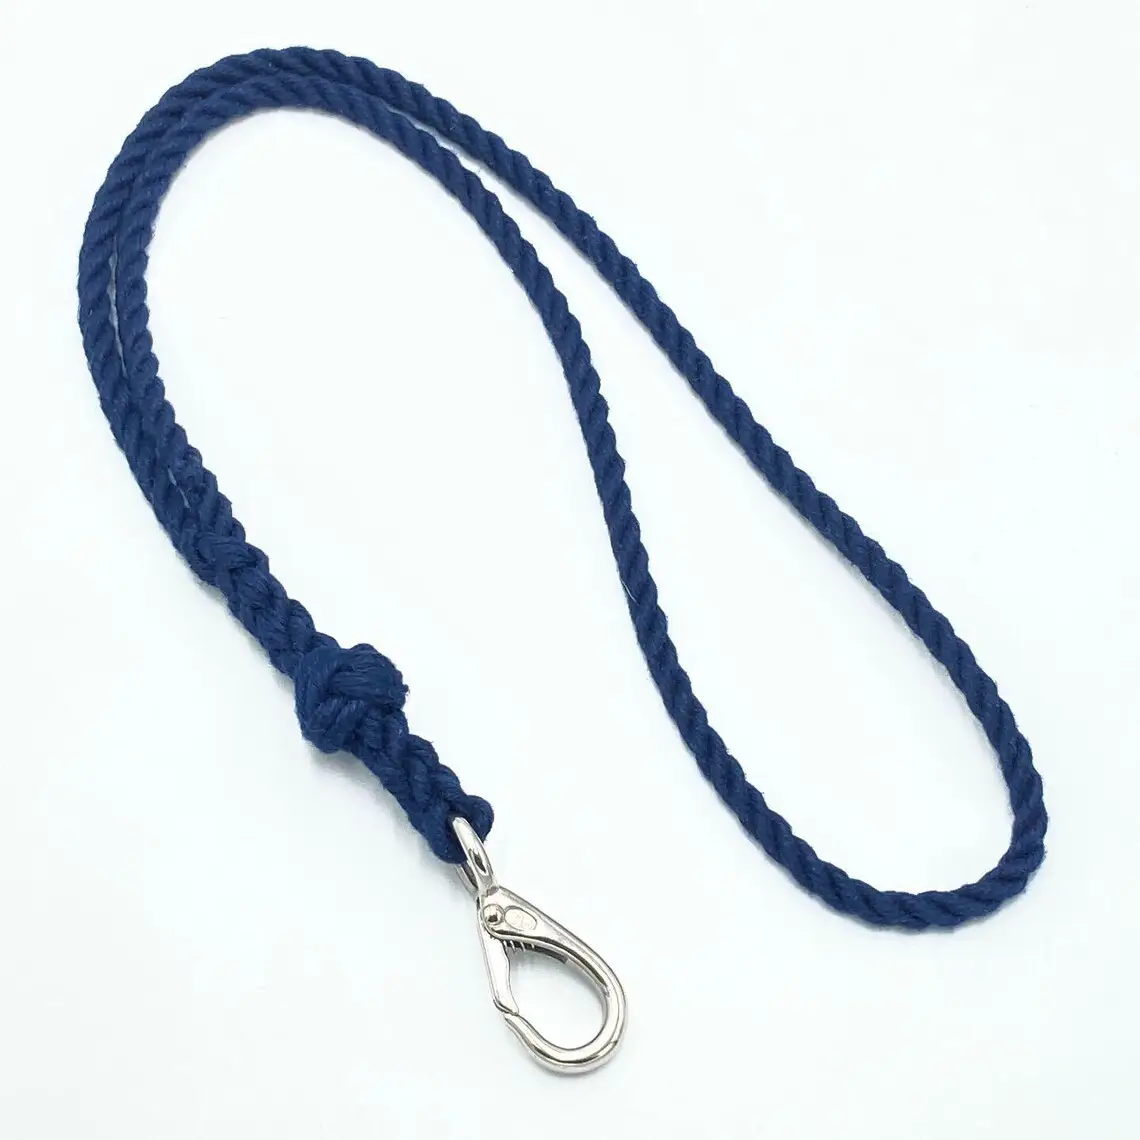 ROPE LANYARDS HANDMADE from the finest nautical rope and fittings available for sport, business or school